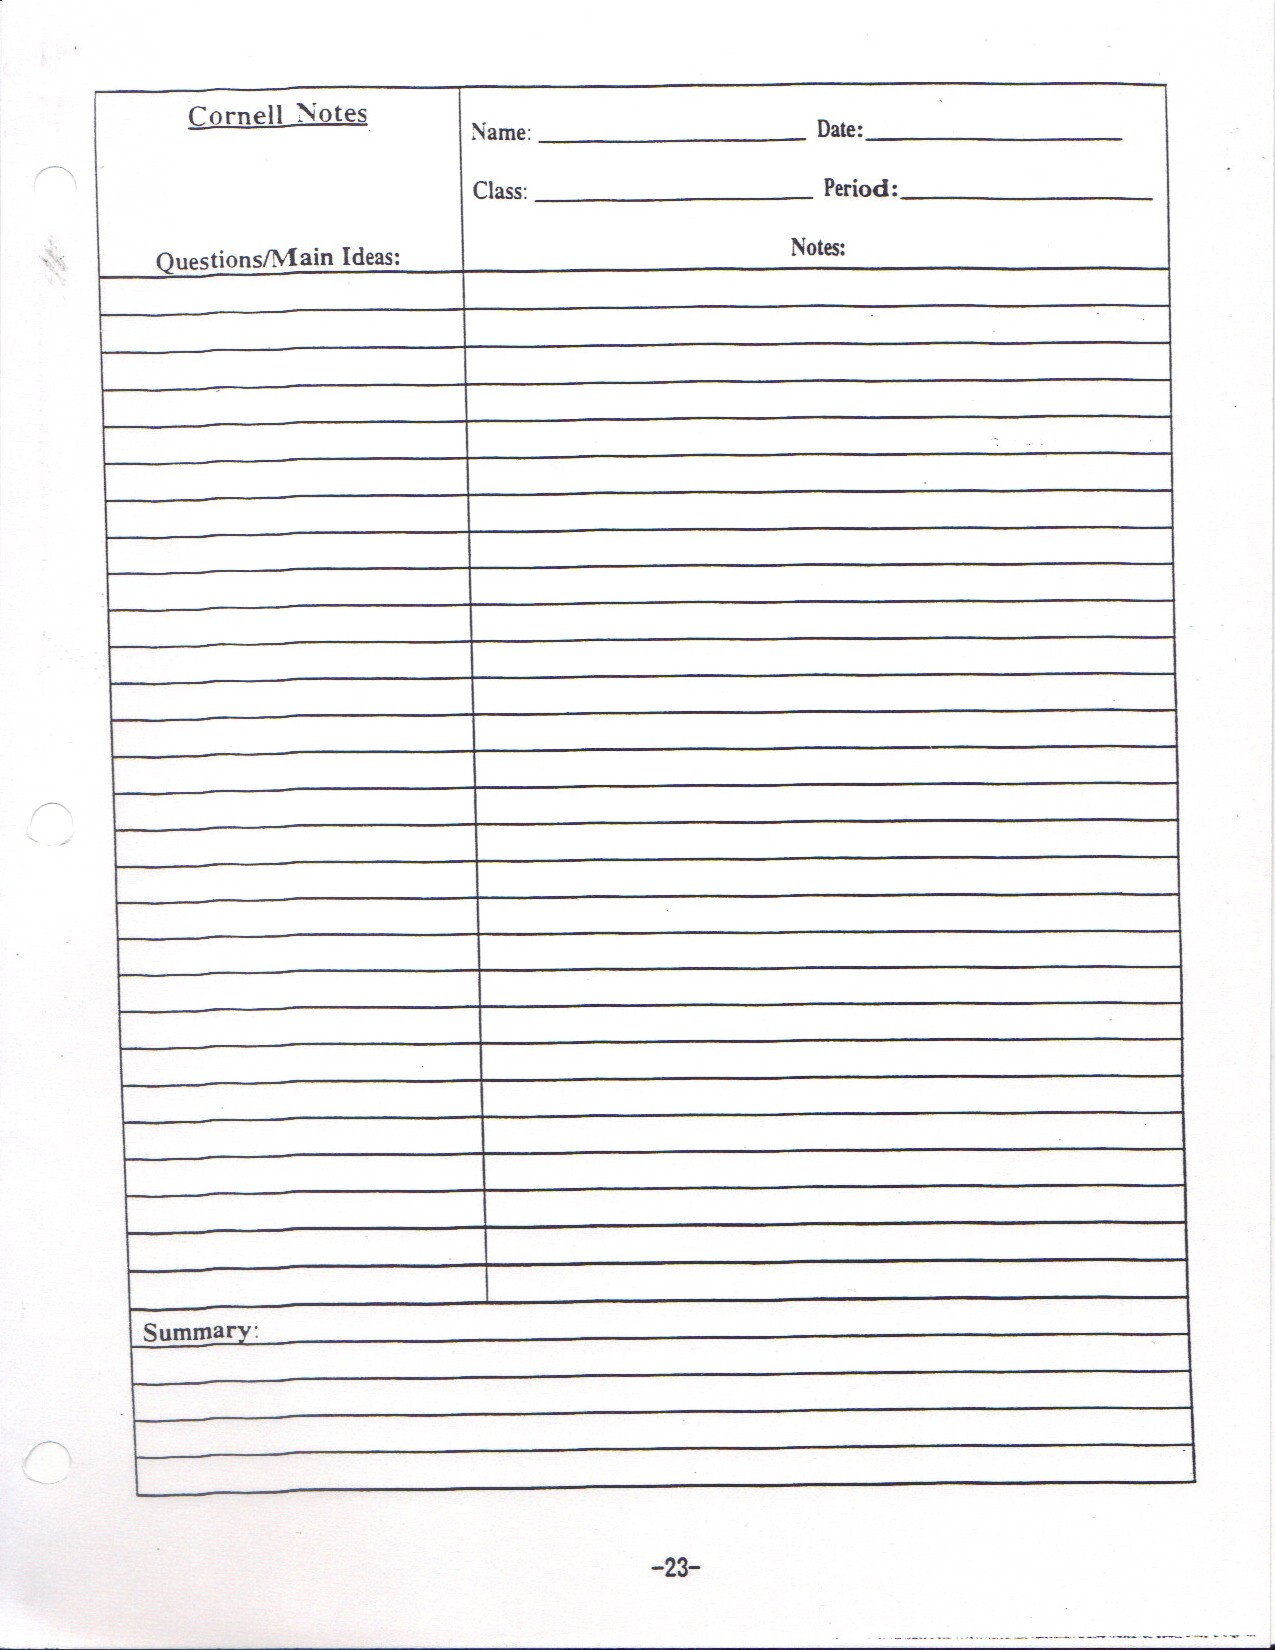 6-best-images-of-printable-cornell-note-sheet-avid-cornell-note-sheet-avid-cornell-notes